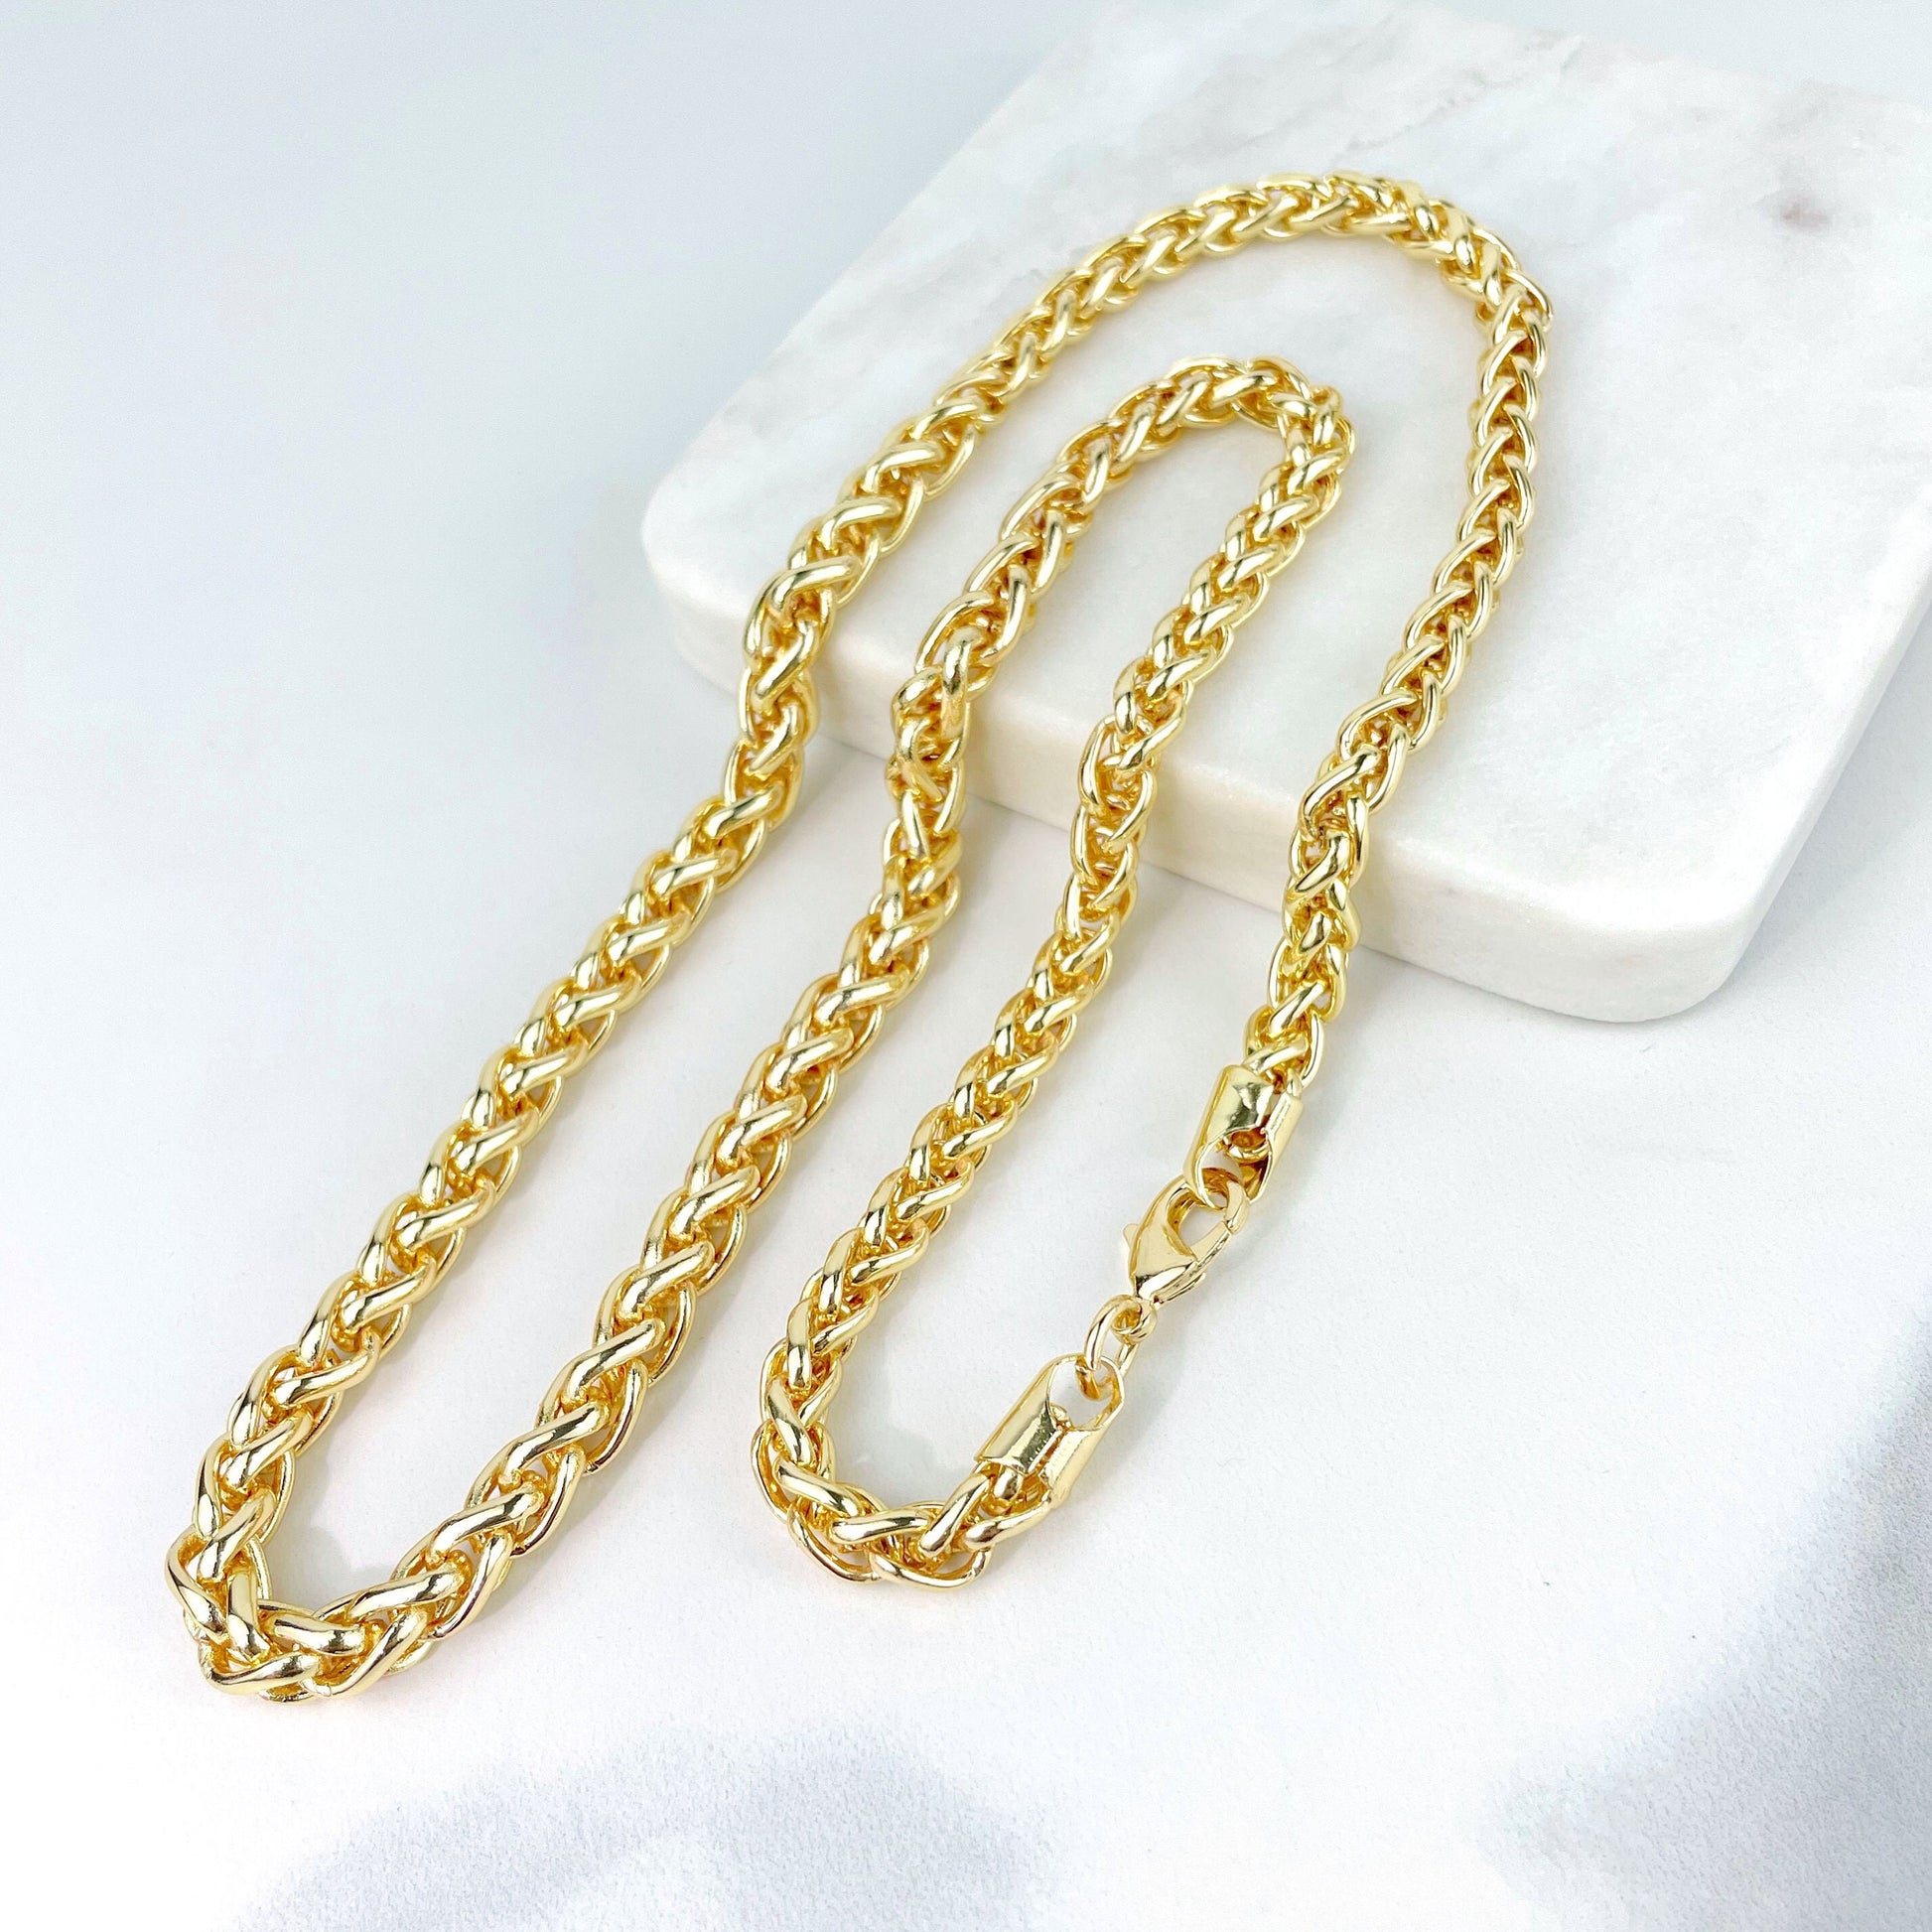 18k Gold Filled 6mm Curb Link Chain, 18 or 24 Inches, Lobster Claw Wholesale Jewelry Making Supplies